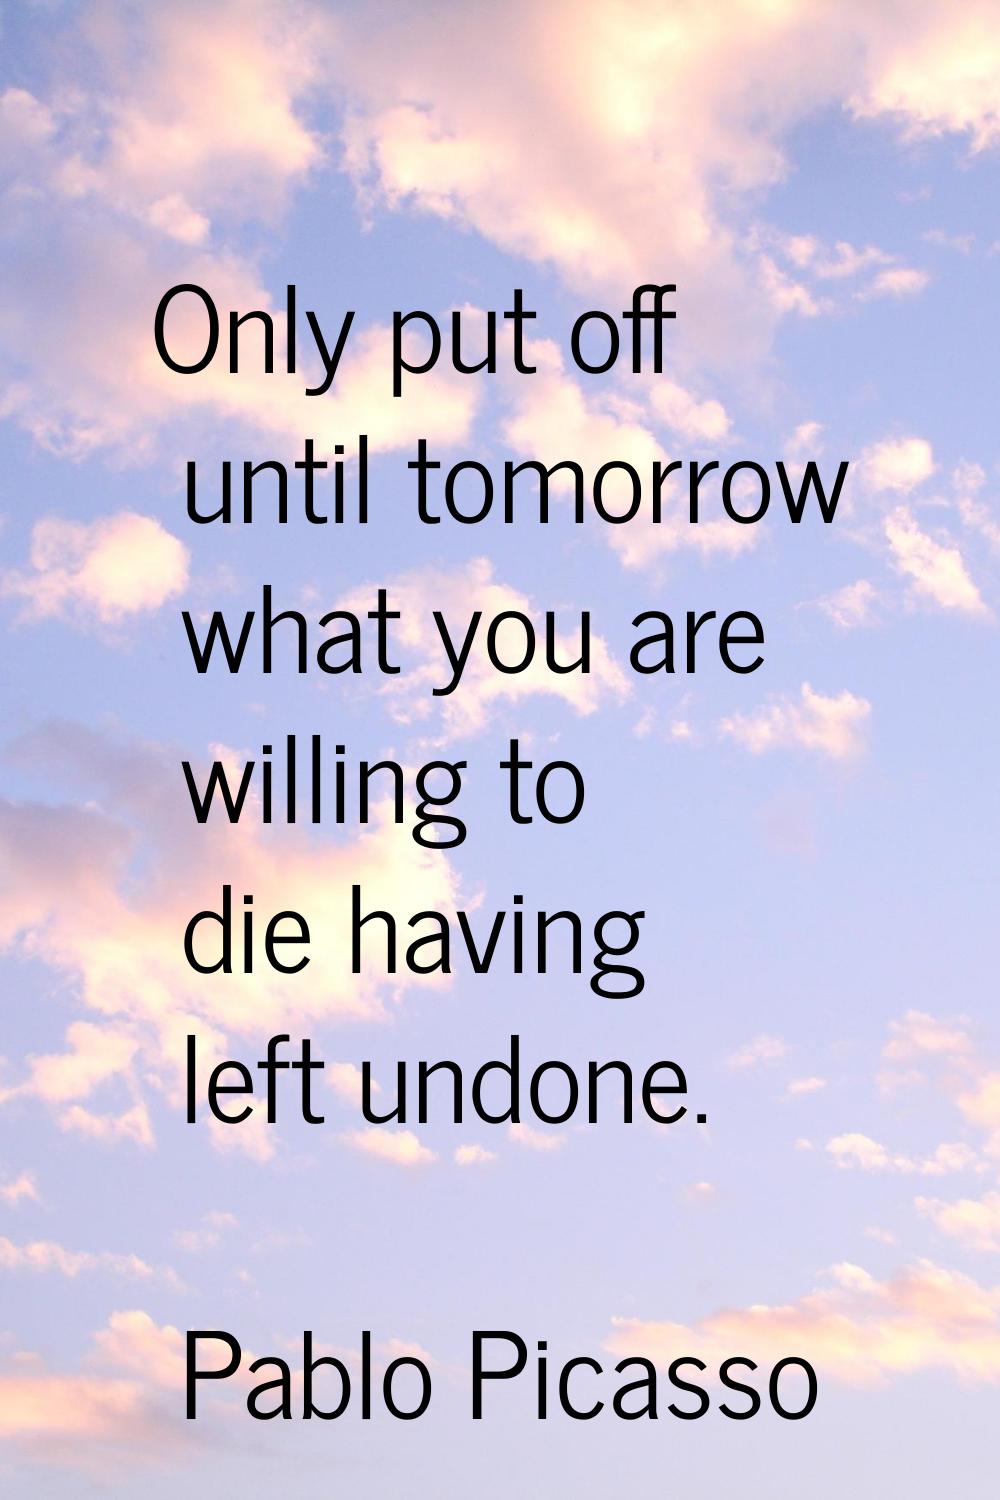 Only put off until tomorrow what you are willing to die having left undone.